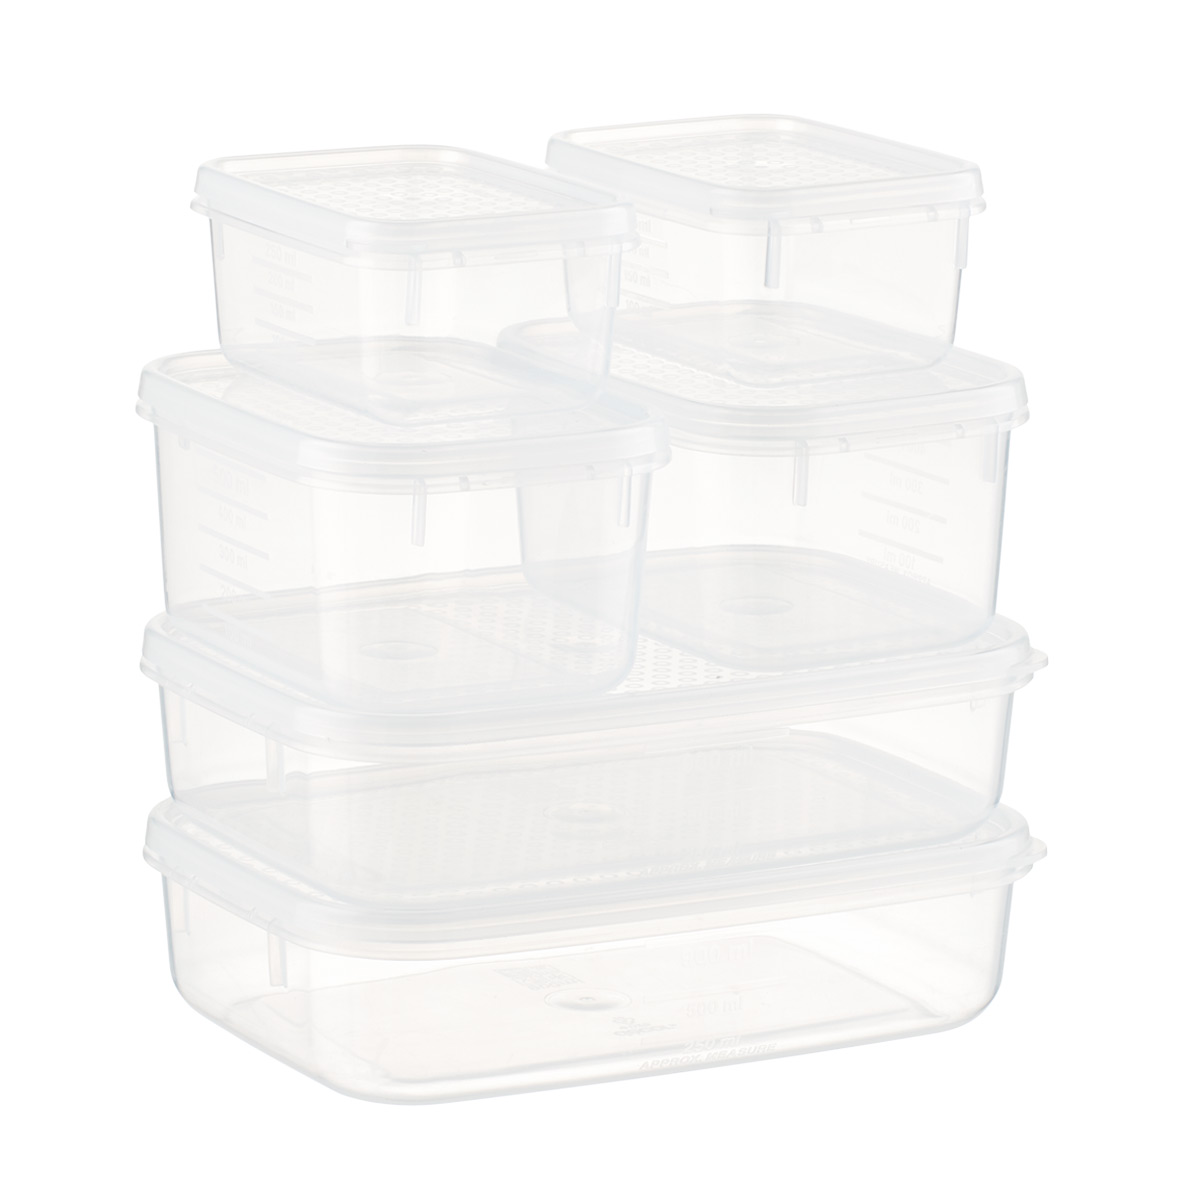 https://www.containerstore.com/catalogimages/344218/10074989-tellfresh-value-clear-set-o.jpg